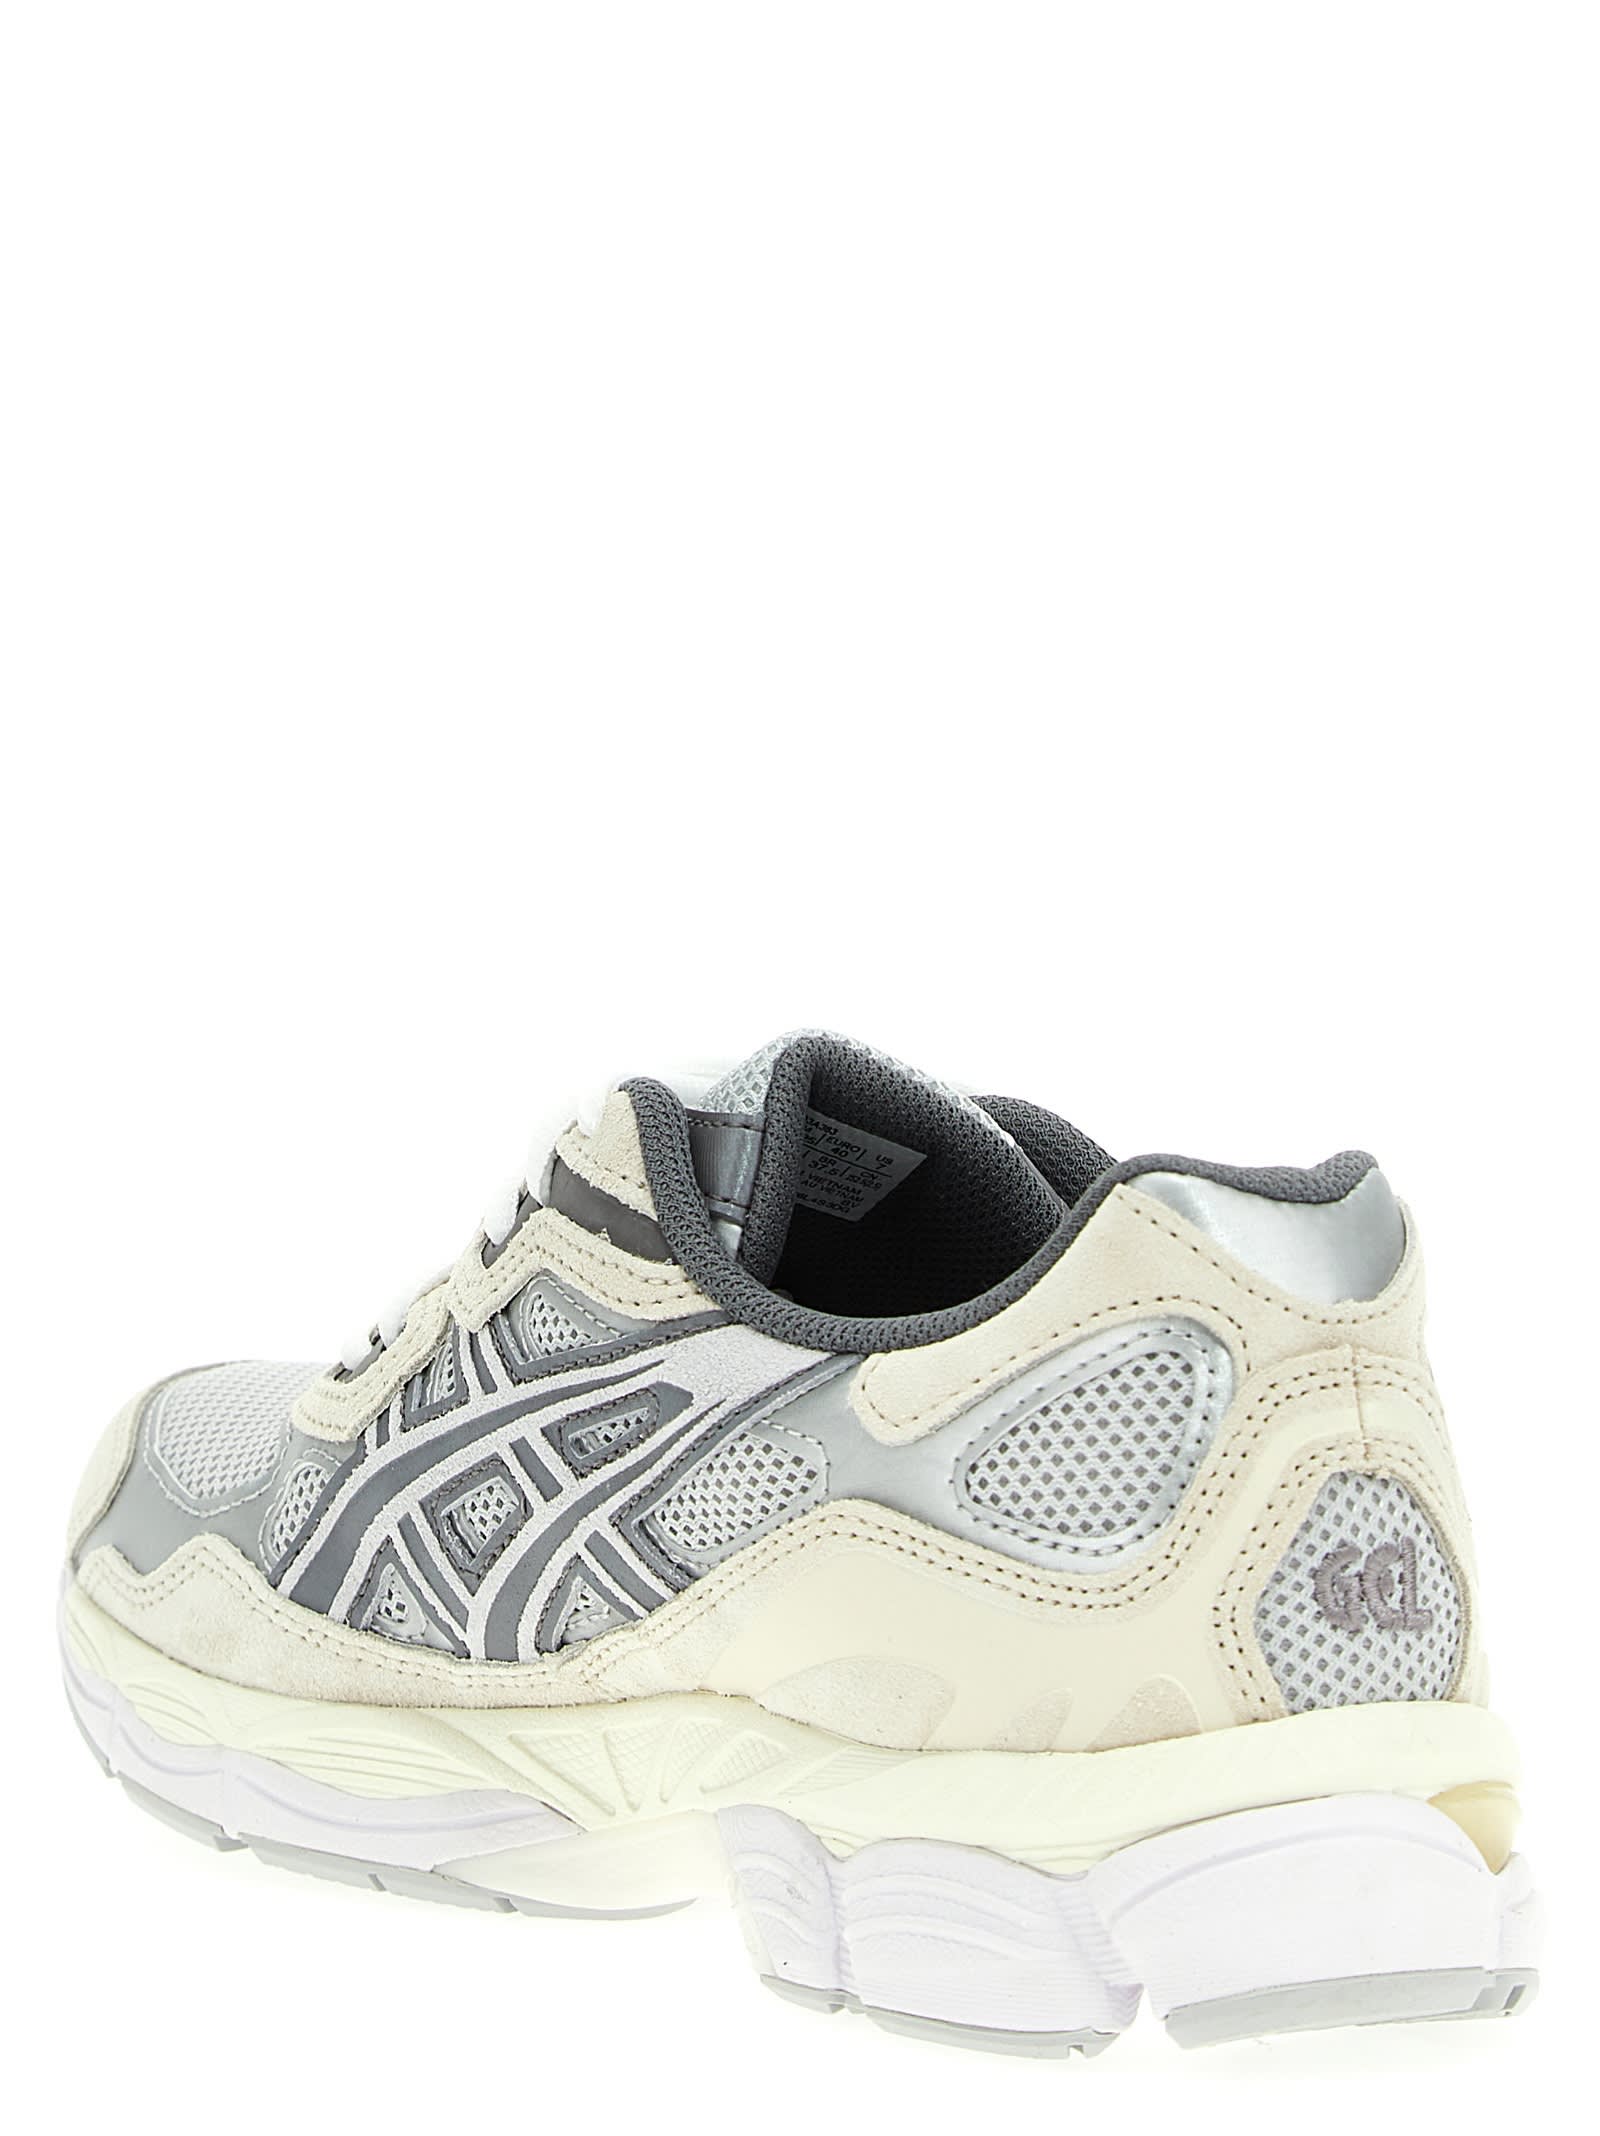 Shop Asics Gel-nyc Sneakers In Concrete/oatmeal